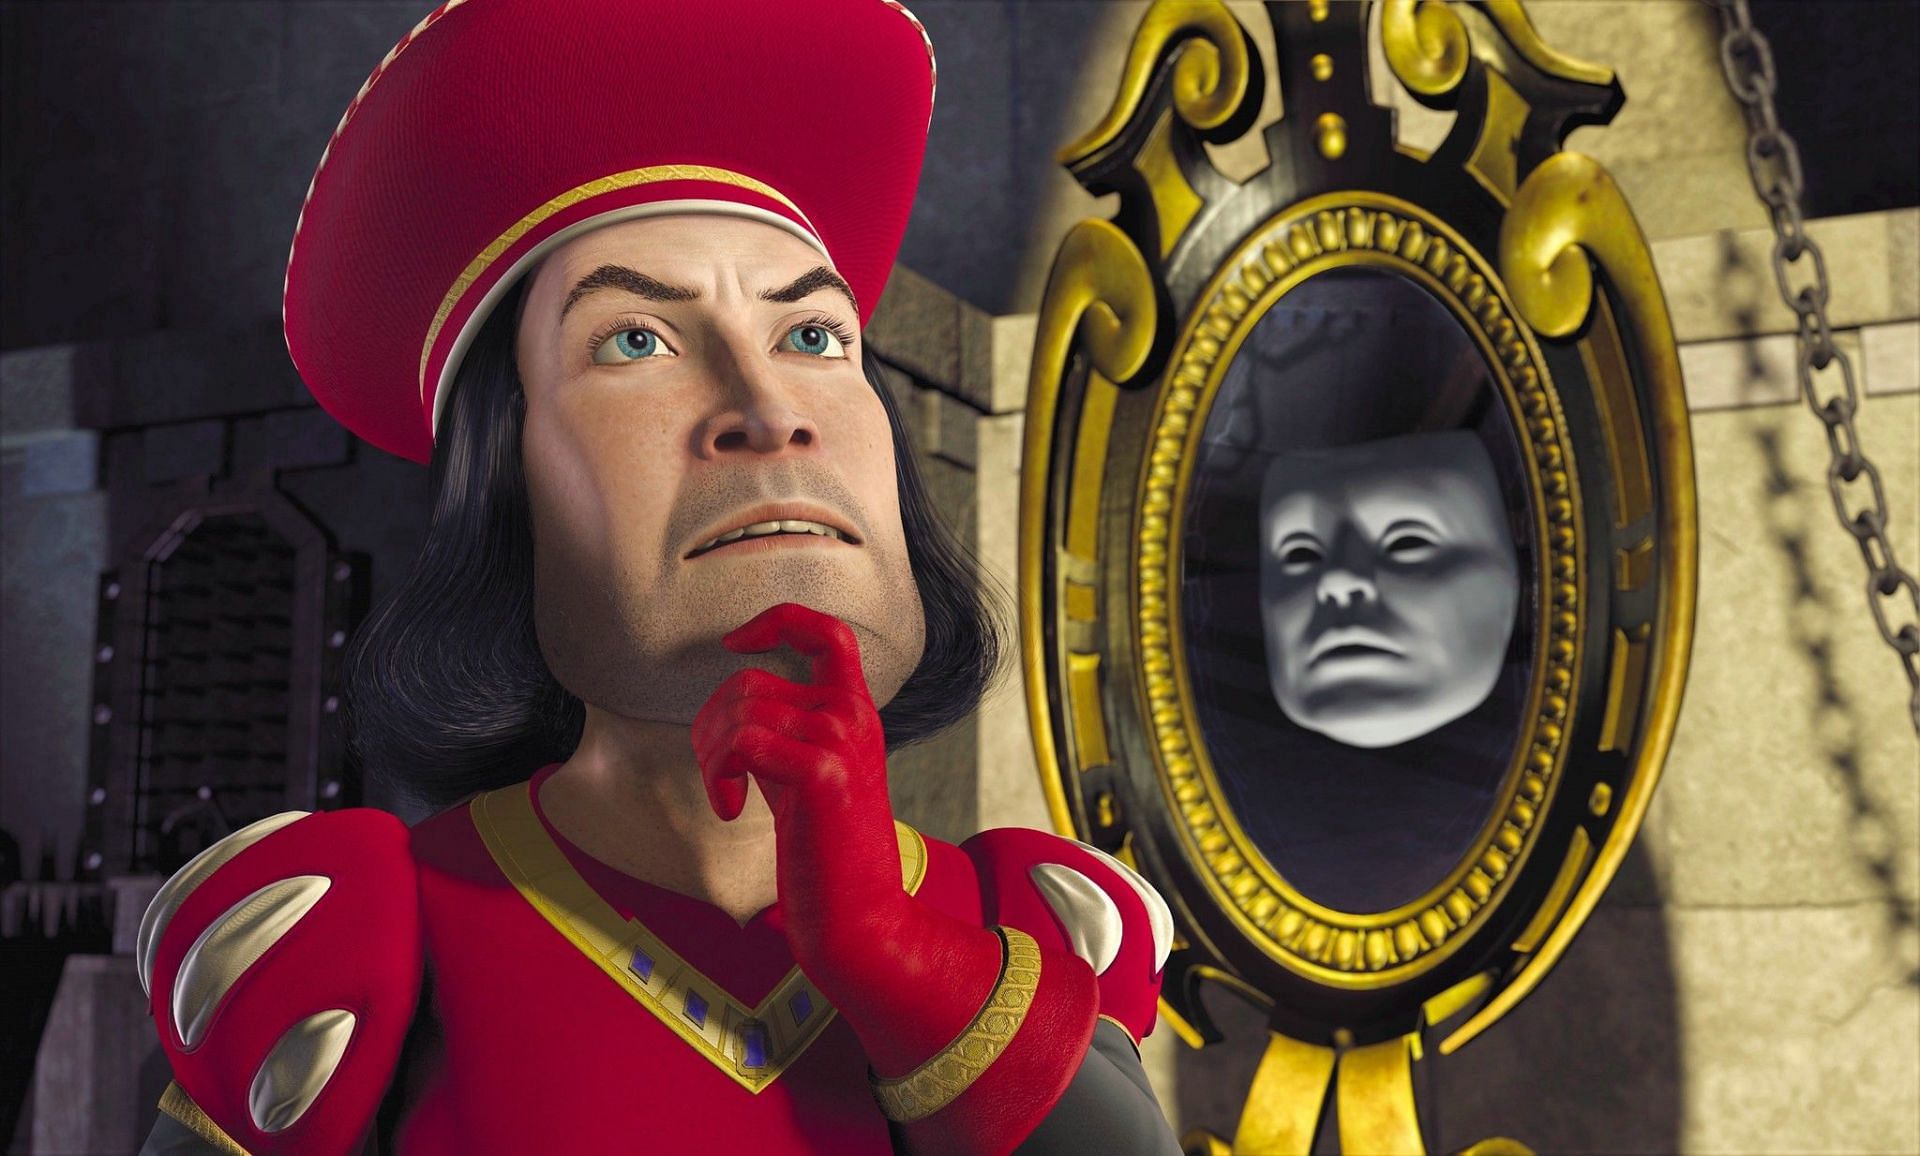 Lord Farquaad in the movie (Image via DreamWorks Animation)